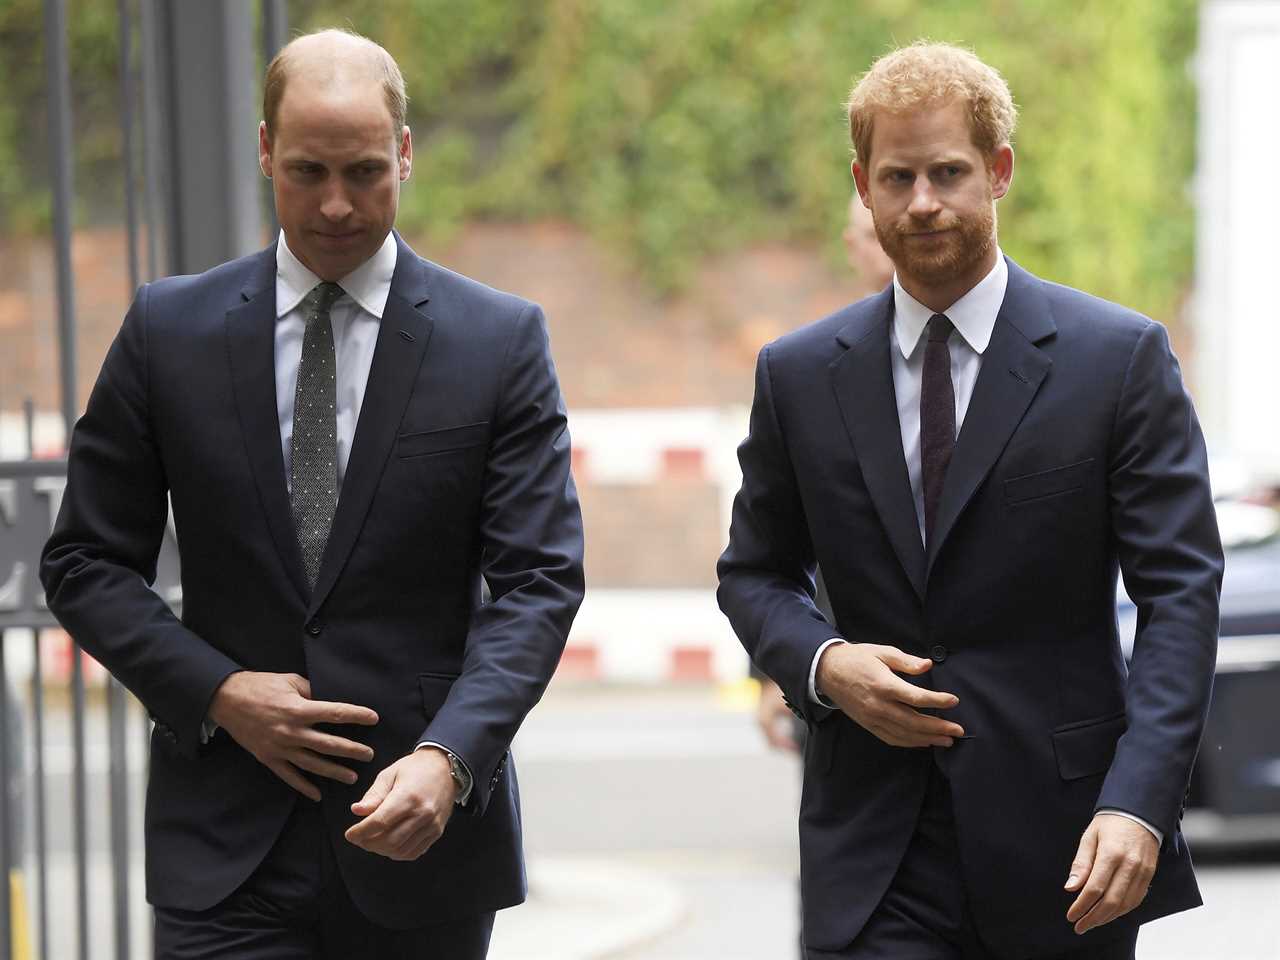 Prince William cannot bite at Harry’s claims – a public slanging match is beneath him